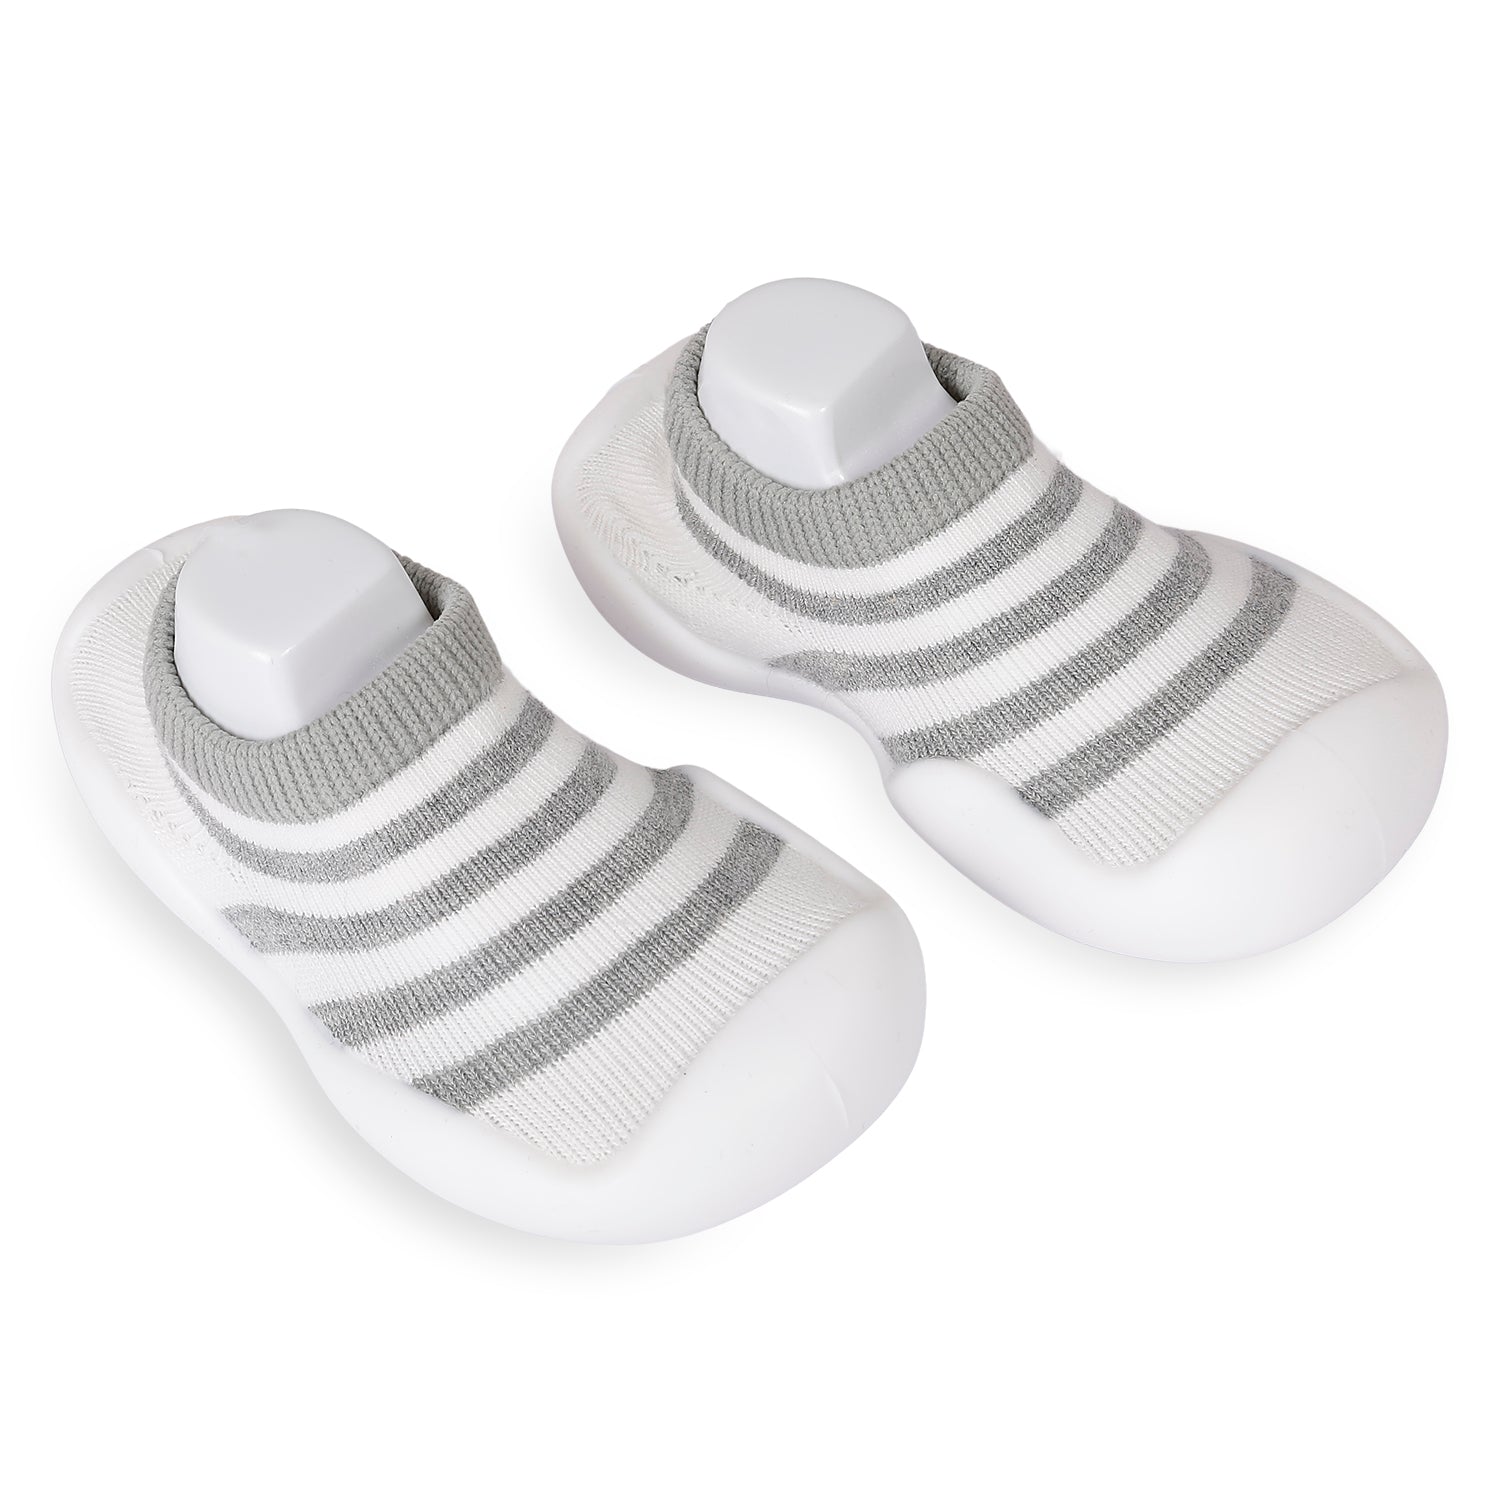 Slip-On Shoes Striped Grey - Baby Moo